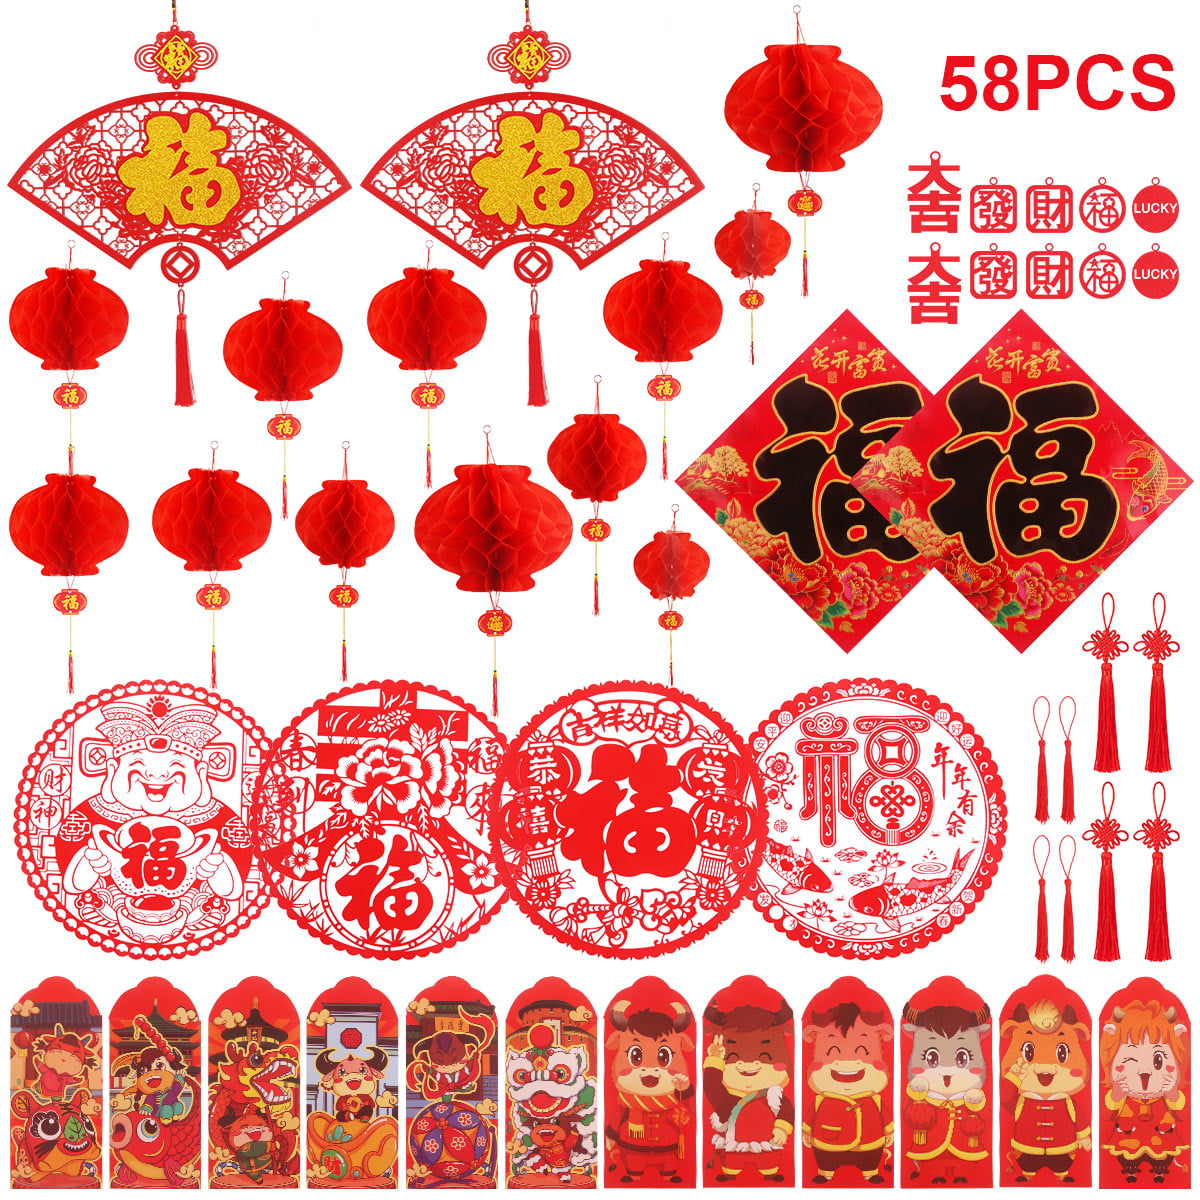 52 pieces Chinese Couplets Chunlian Paper Red Lantern Red Envelopes Hong Bao Chinese Fu Character Paper Window Spring Festival Party Decor Chinese New Year Decoration